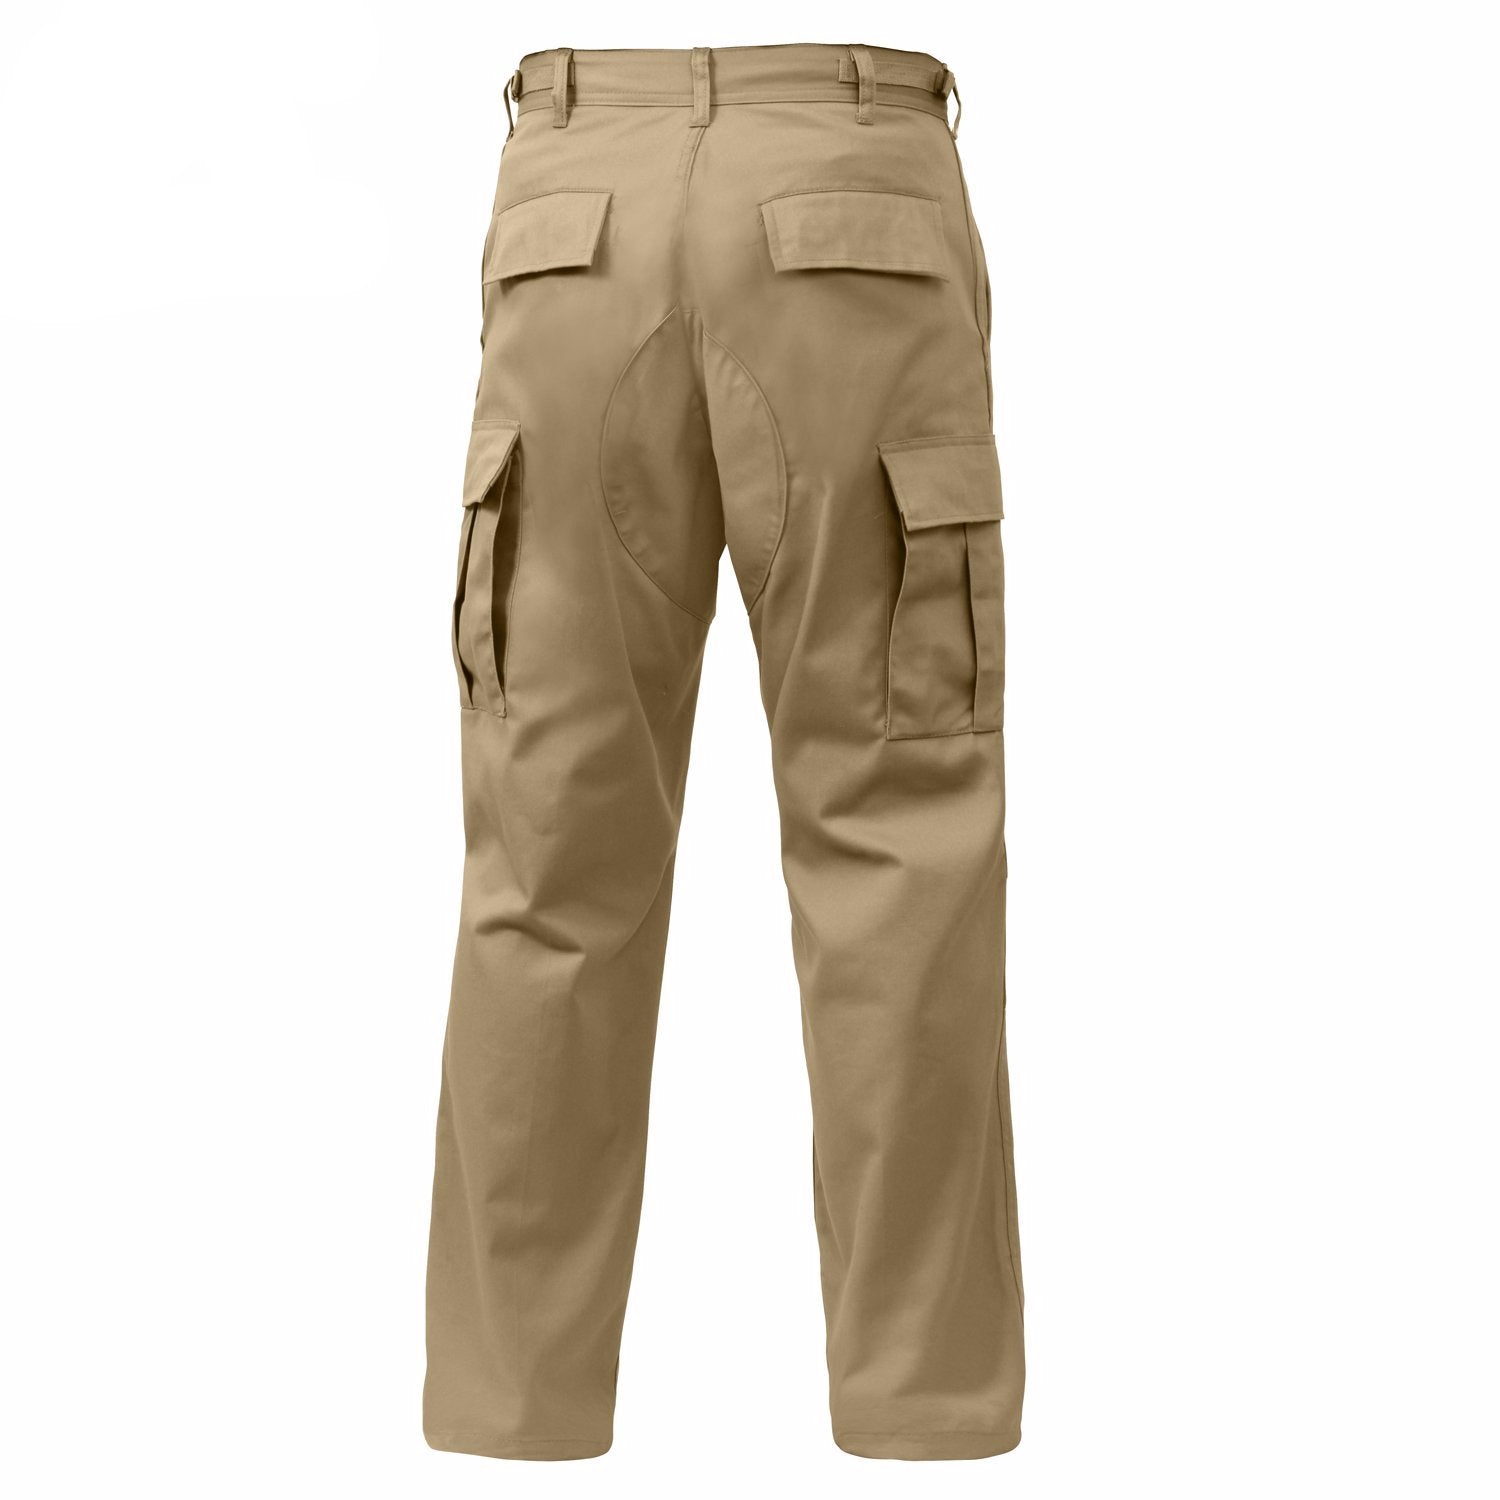 Relaxed Fit Zipper Fly BDU Pants – Outdoor King